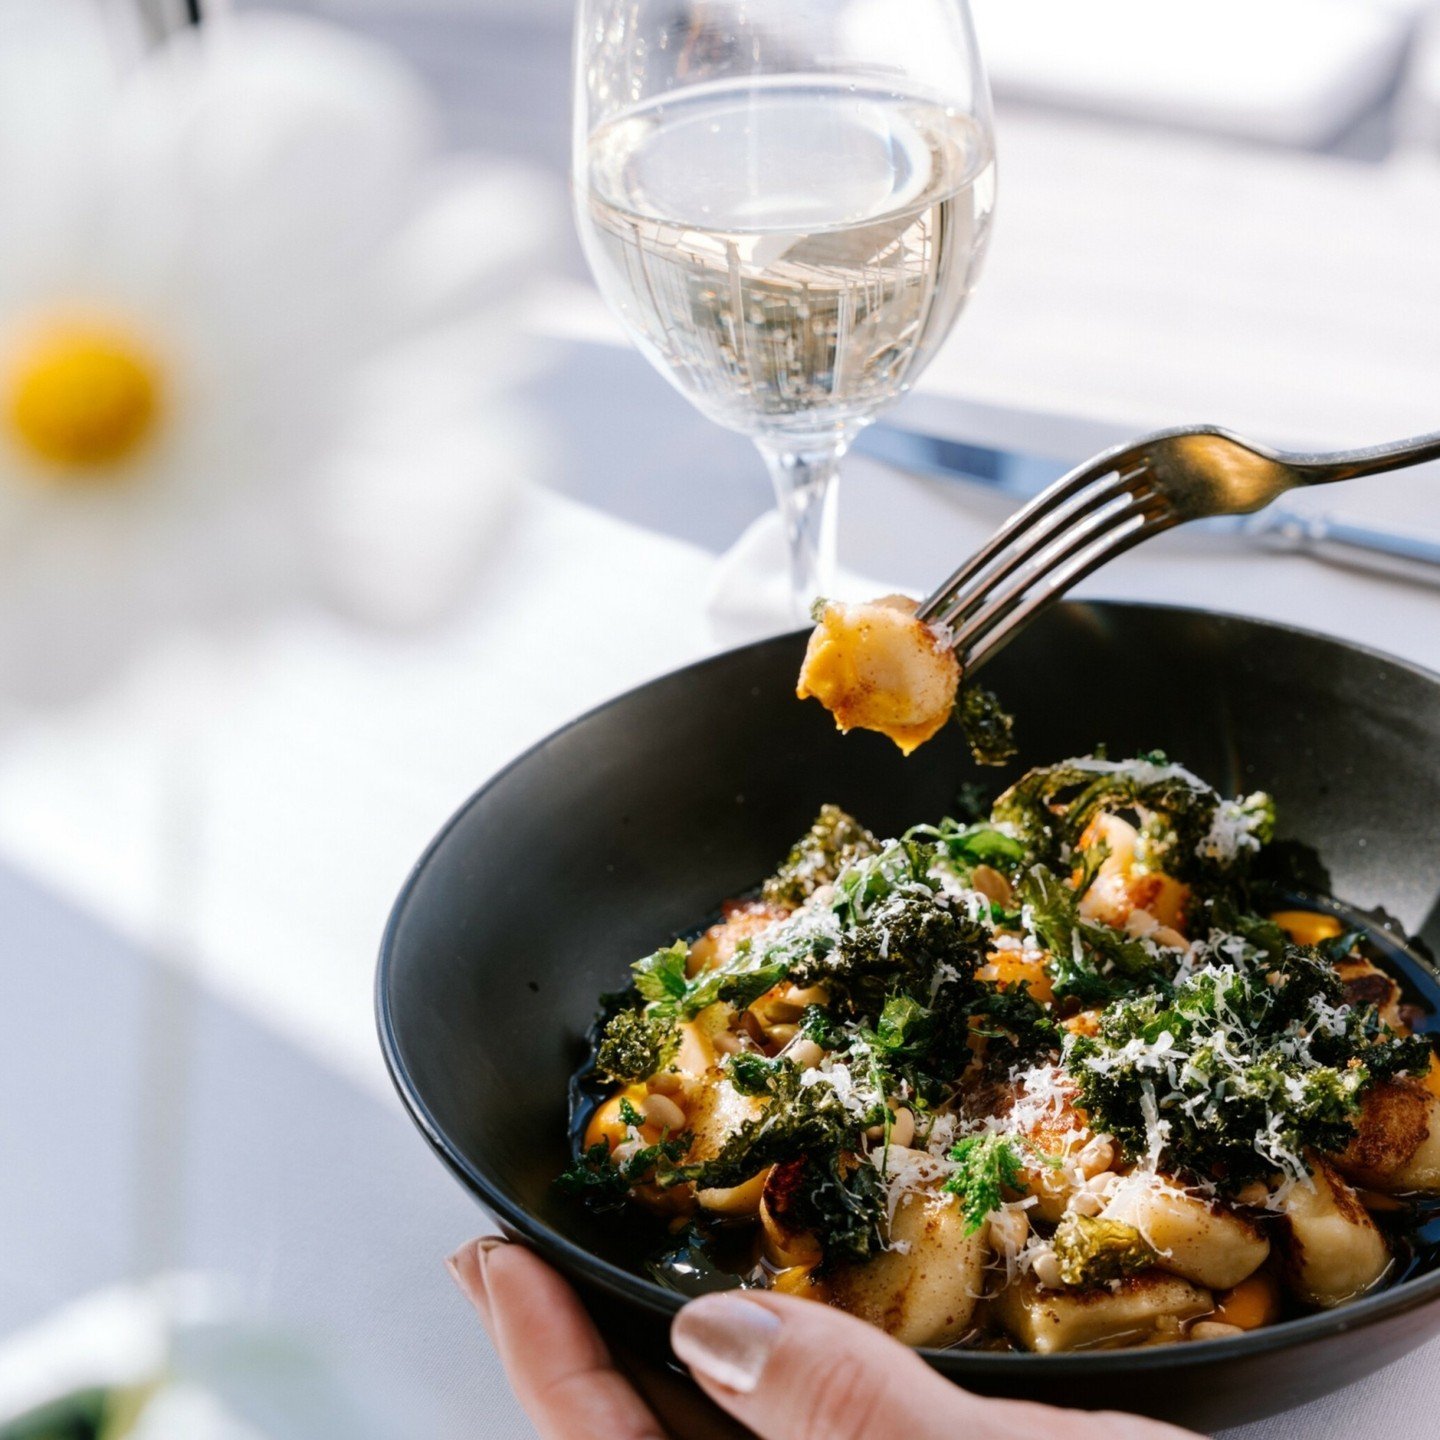 Gnocchi, butternut, pine nuts, brown butter, parmesan.

Enjoy this mouth watering dish in the comfort of your hotel room or at our restaurant from 5:30-9pm daily.
.
.
.
#restaurant #tauranga #hotelrestaurant #vegetarian #gnocchi